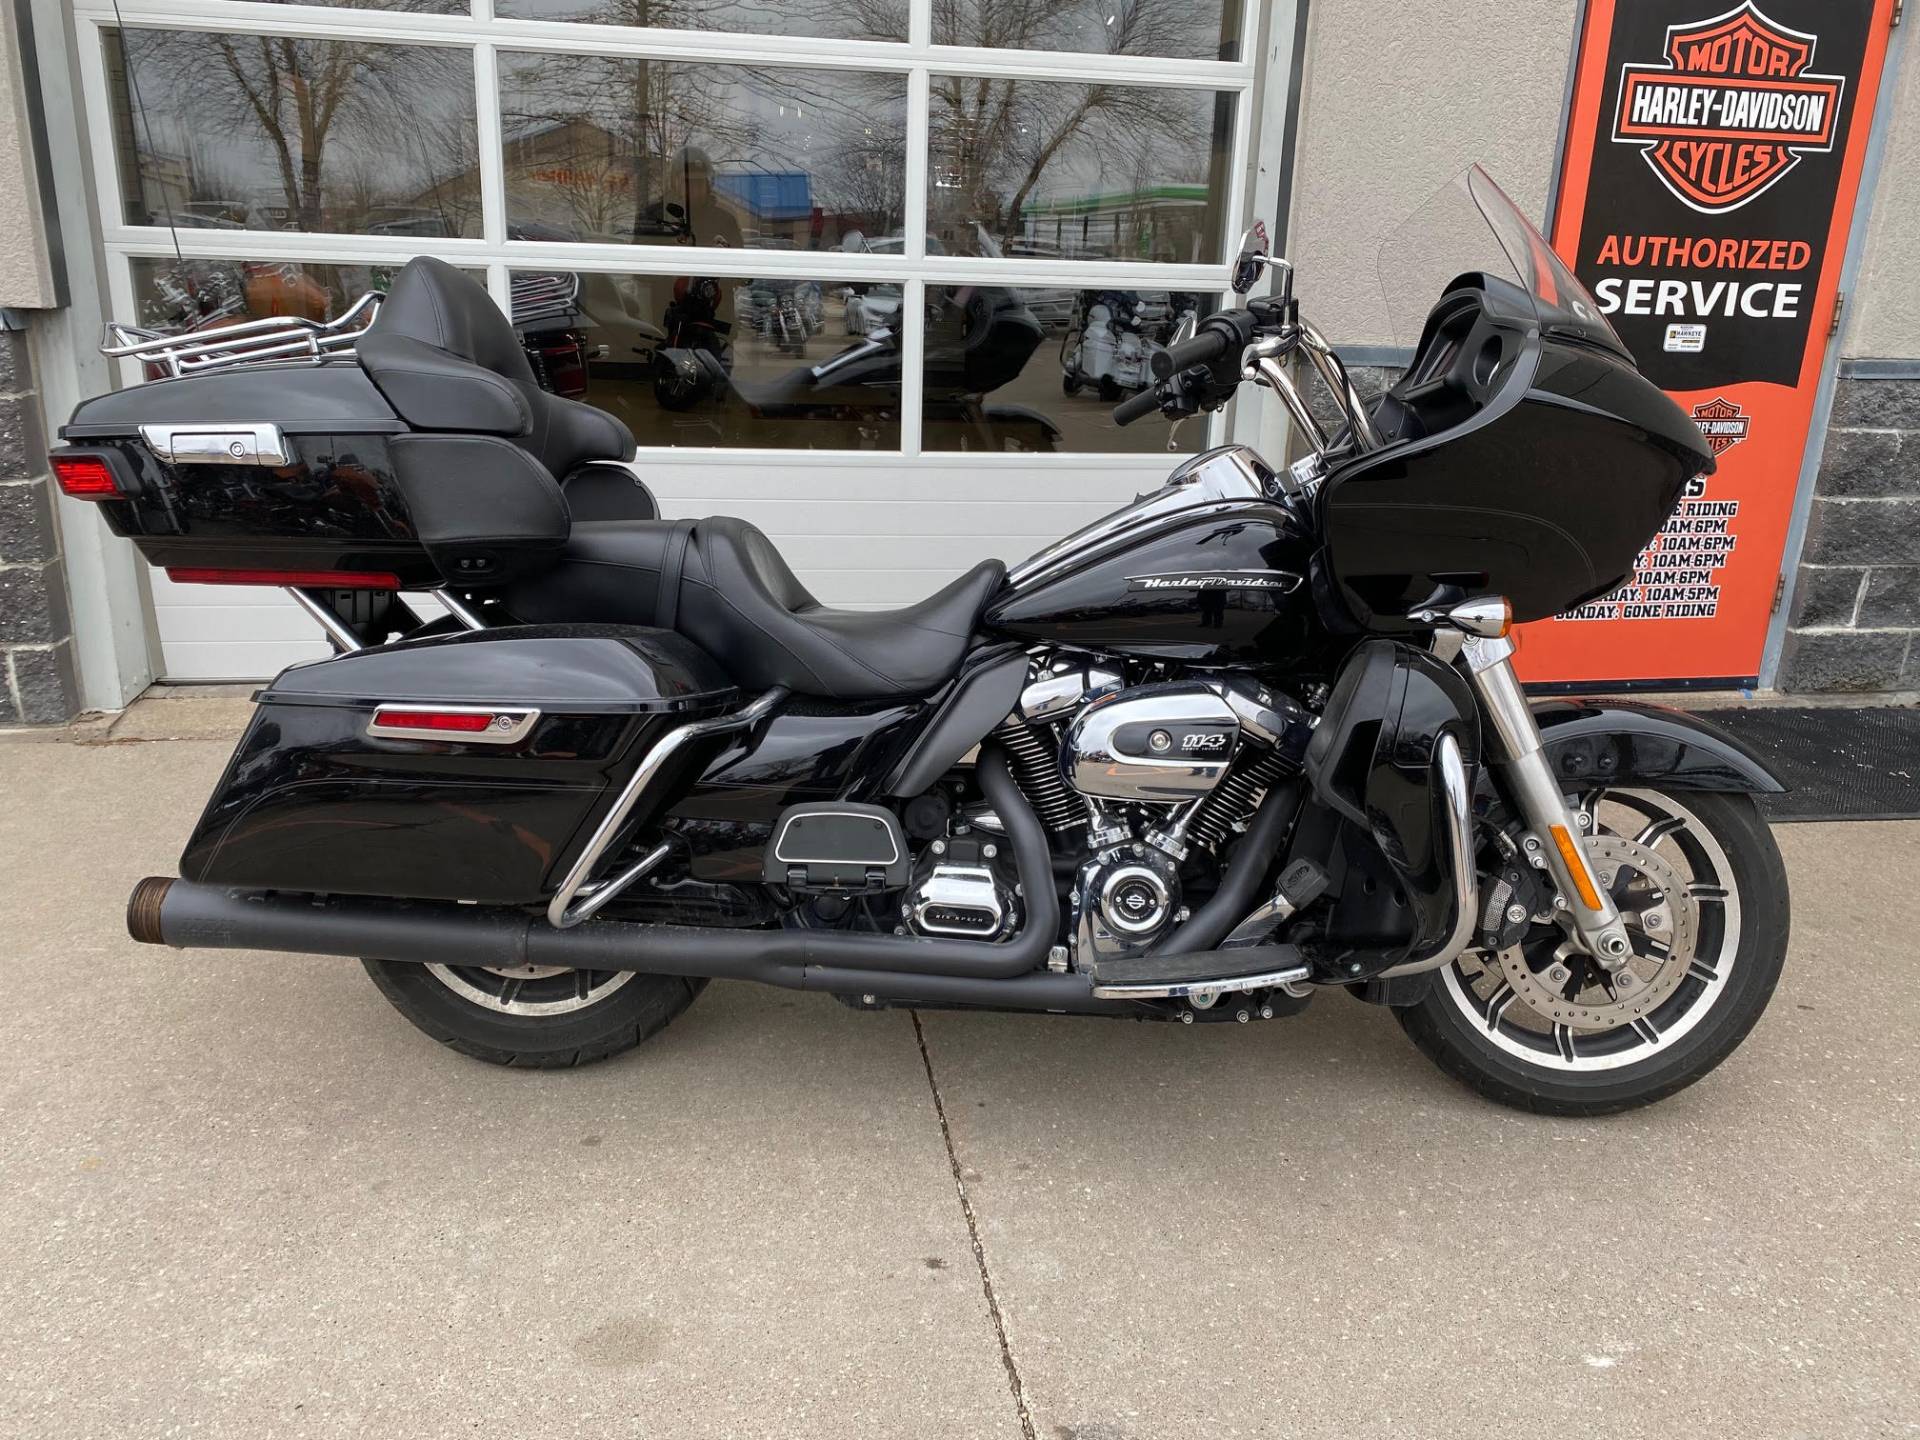 Used 2019 Harley Davidson Road Glide Ultra Vivid Black Motorcycles In Dubuque Ia M655636a